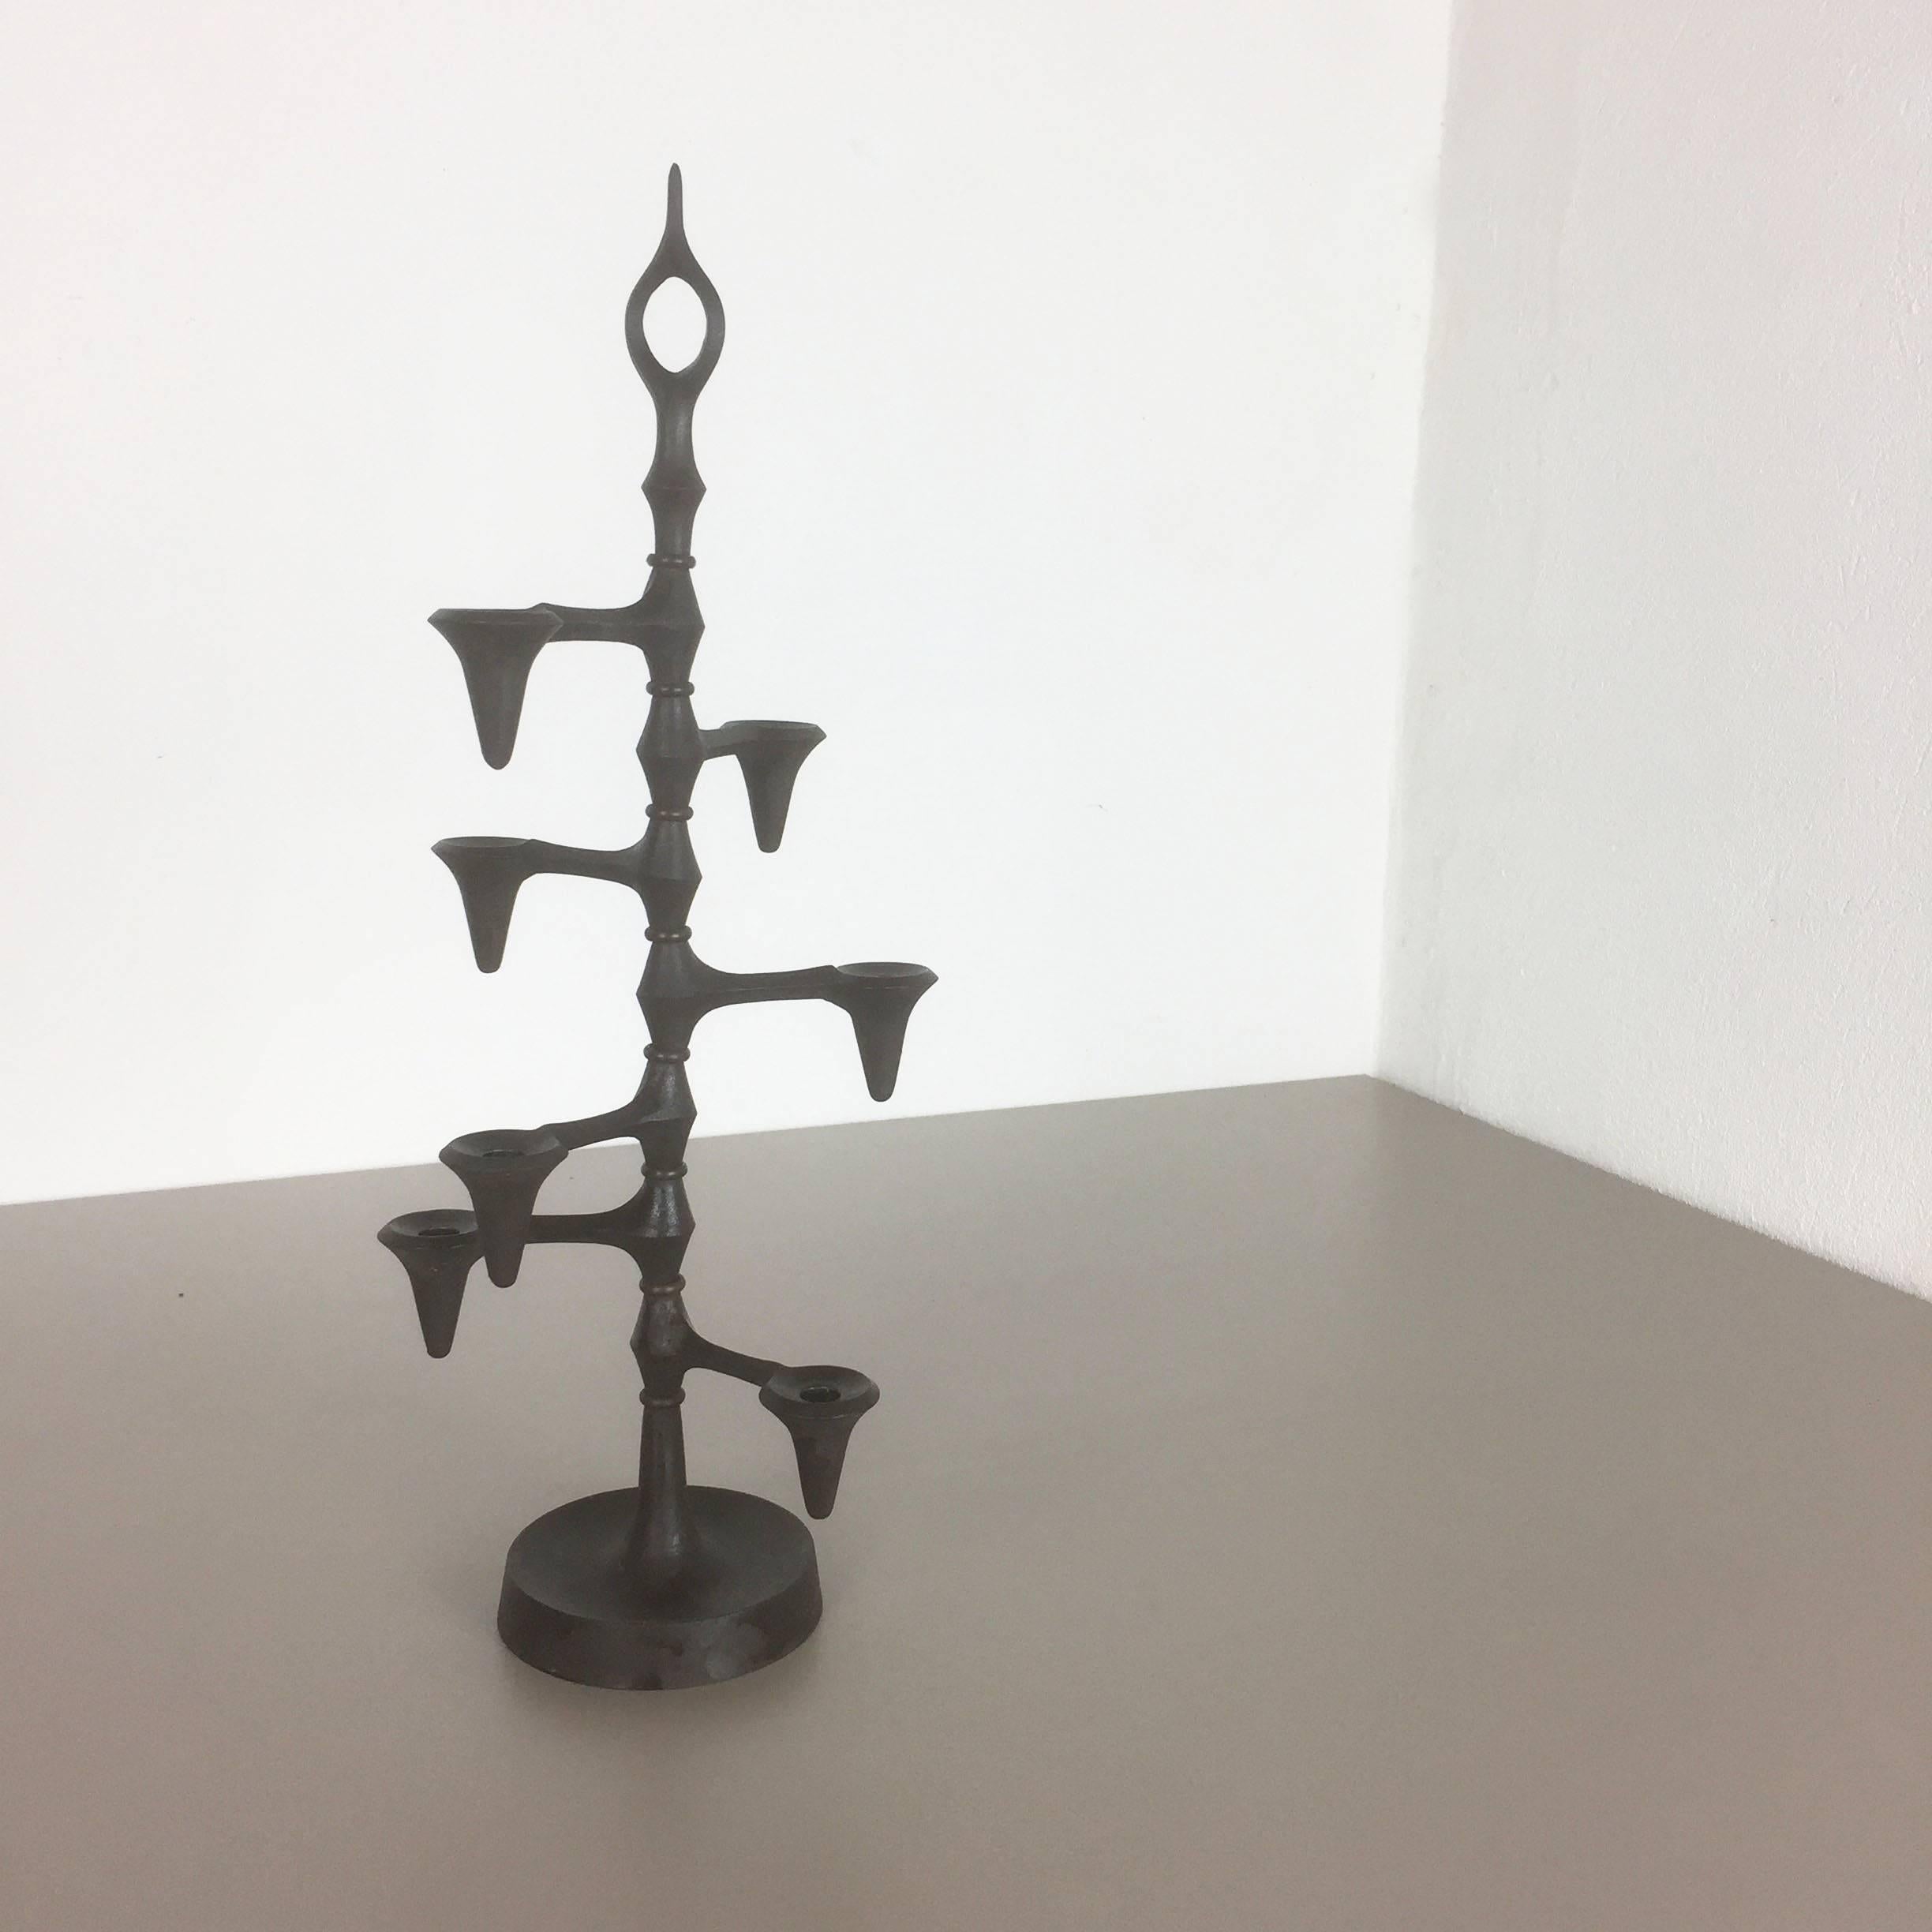 Candleholder. 

Producer: Dansk Designs. 

Designed by Jens Harald Quistgaard, 1960s.

Original Danish candleholder designed by Jens Harald Quistgaard and produced by Dansk Design in the 1960s in Denmark. It is made of cast iron and features